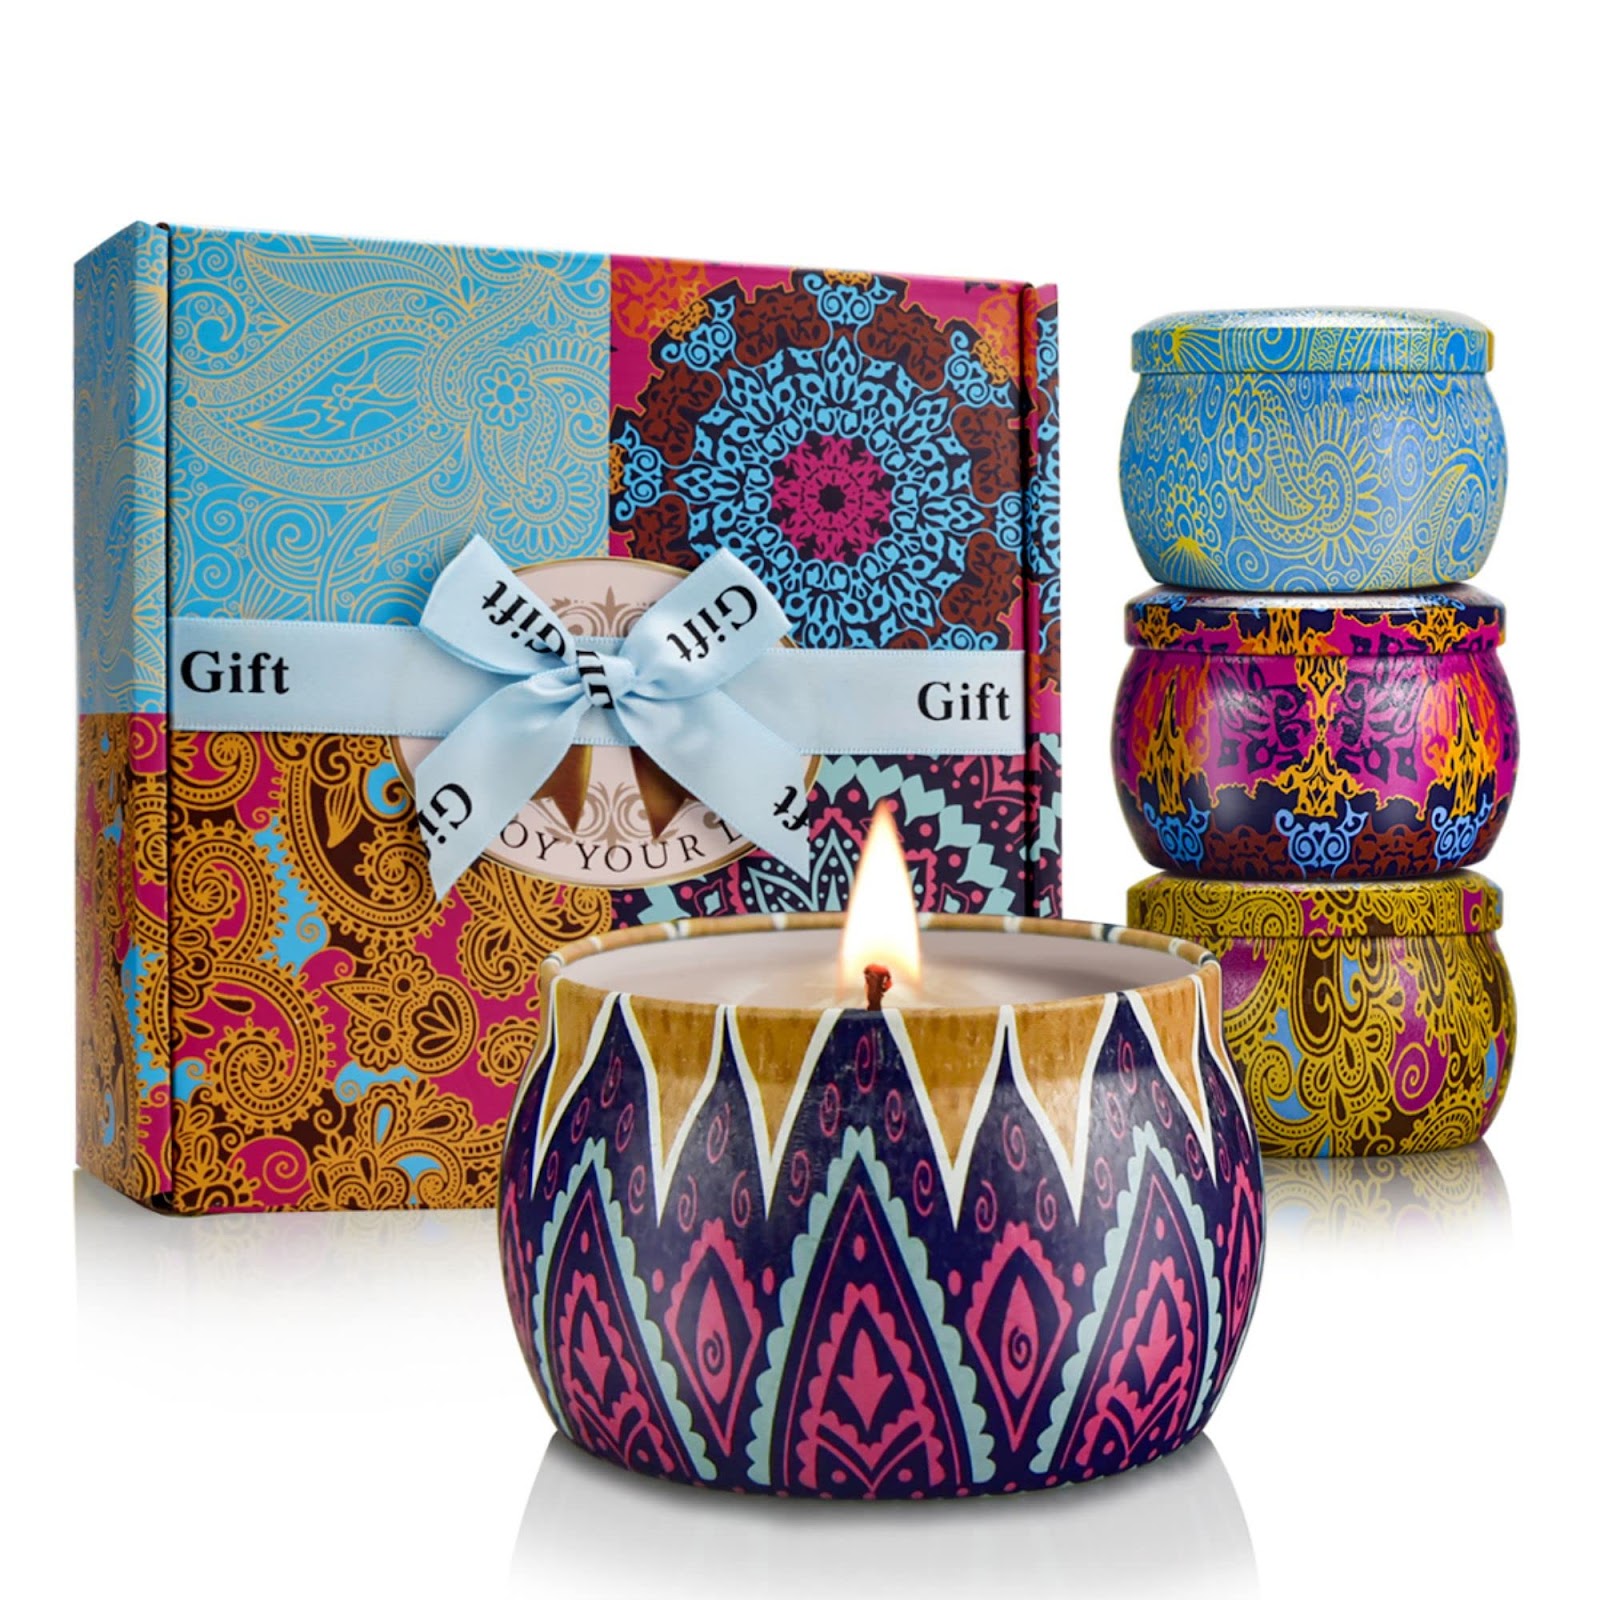 YINUO LIGHT scented candles gift set